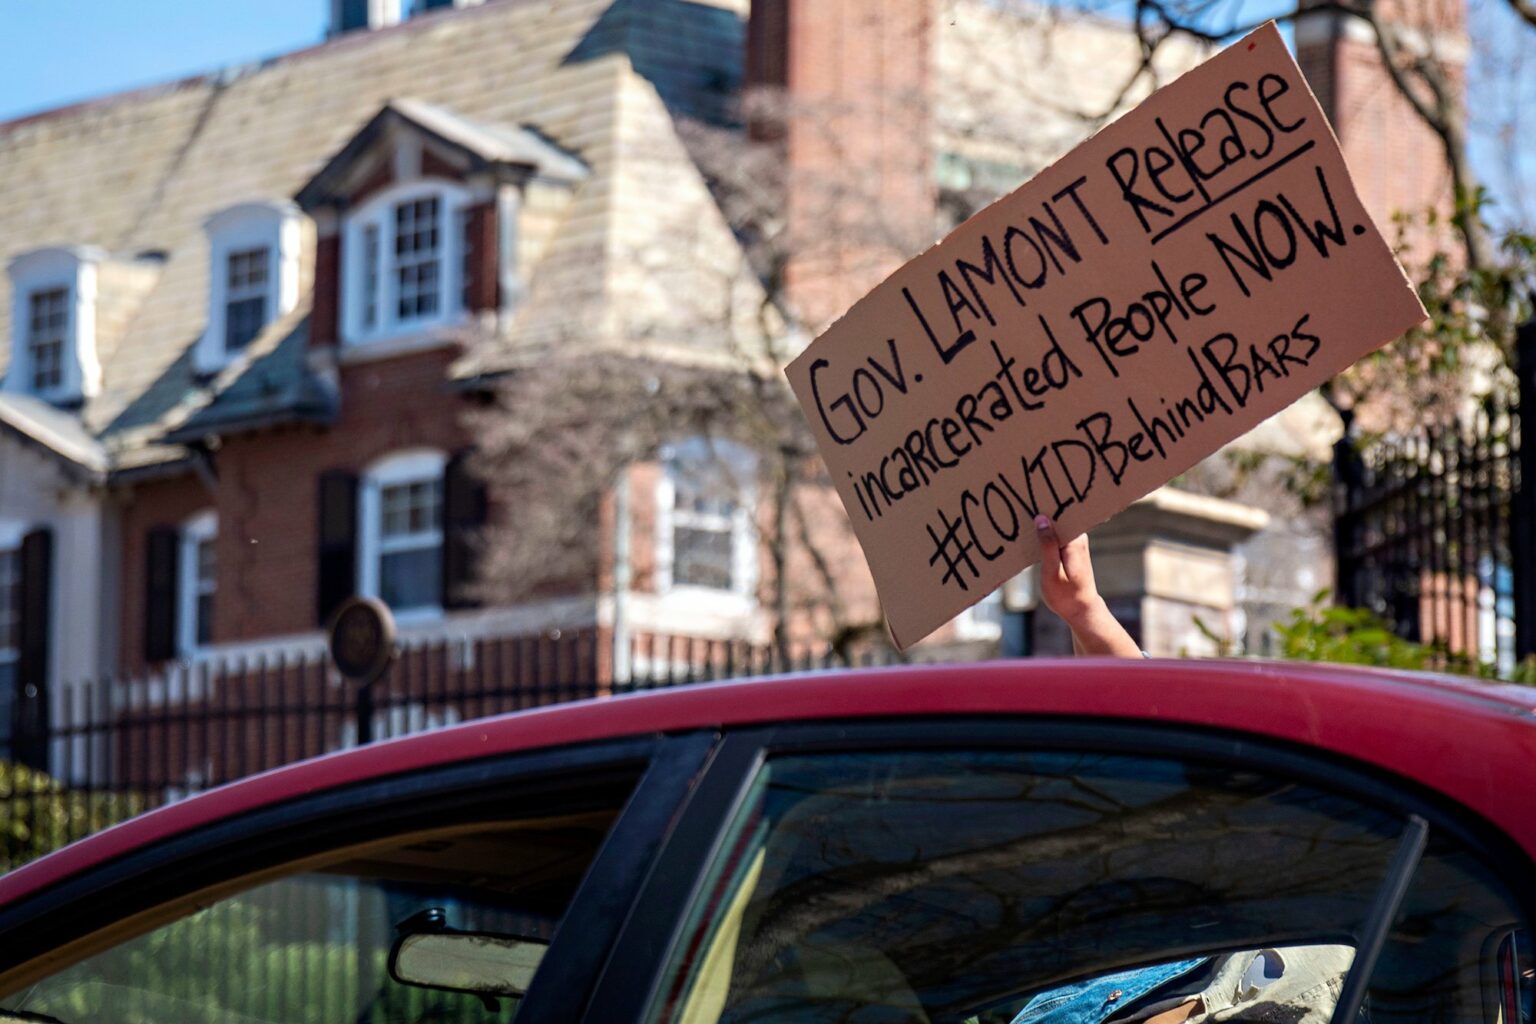 Cars lined up outside of the Connecticut Governor’s Residence in Hartford on Monday, April 6 in protest of Gov. Lamont’s refusal to release inmates at risk of COVID-19. Protesters remained in their cars honking and waving signs. Tyler Russell/Connecticut Public